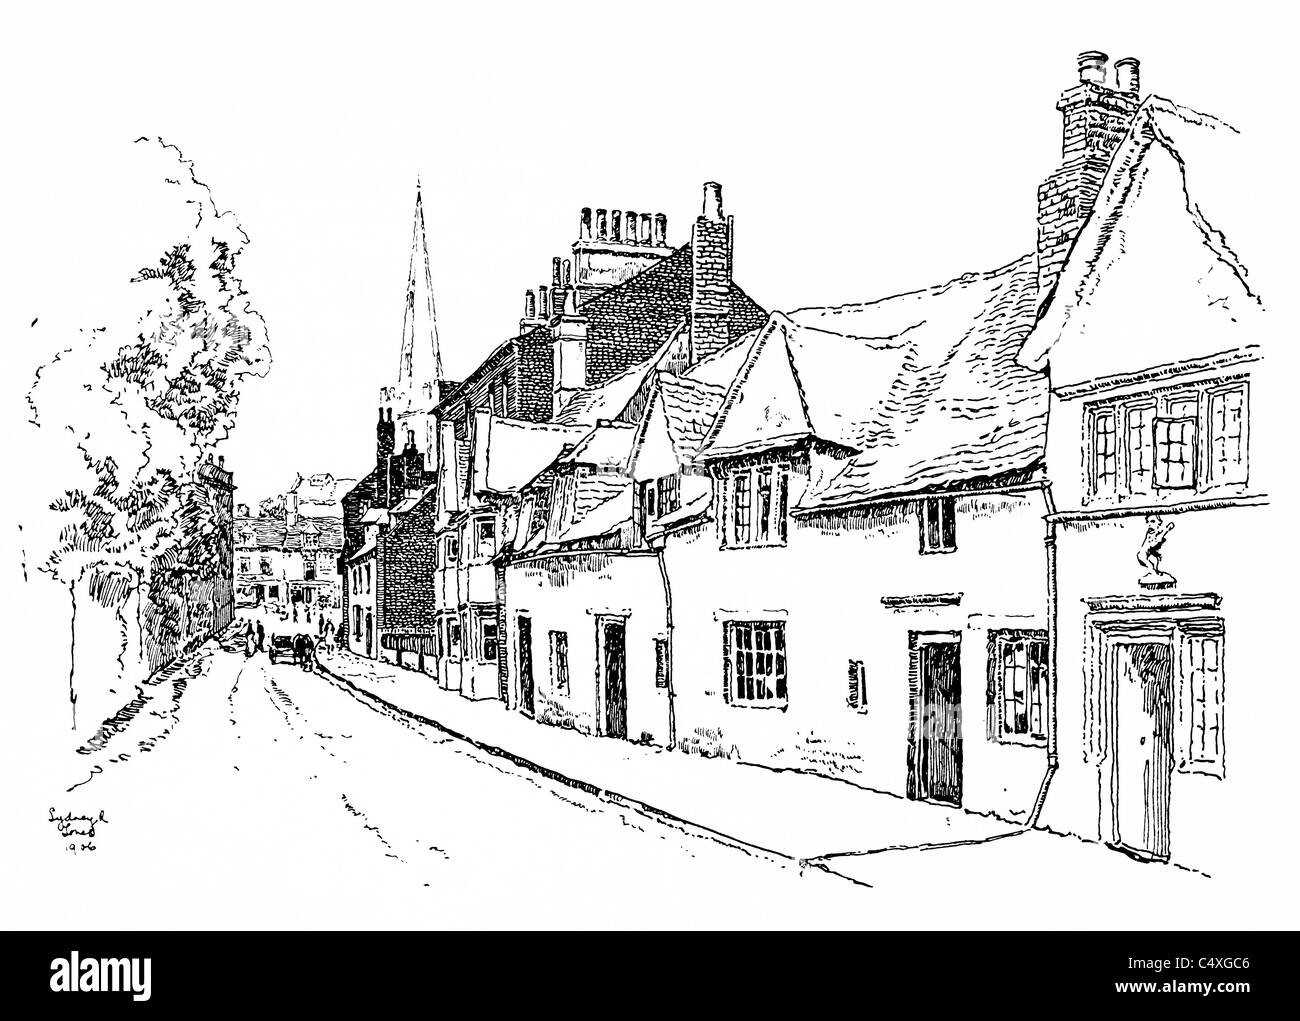 Oundle, Northamptonshire - pen and ink illustration from 'Old English Country Cottages' by Charles Holme, 1906. Stock Photo